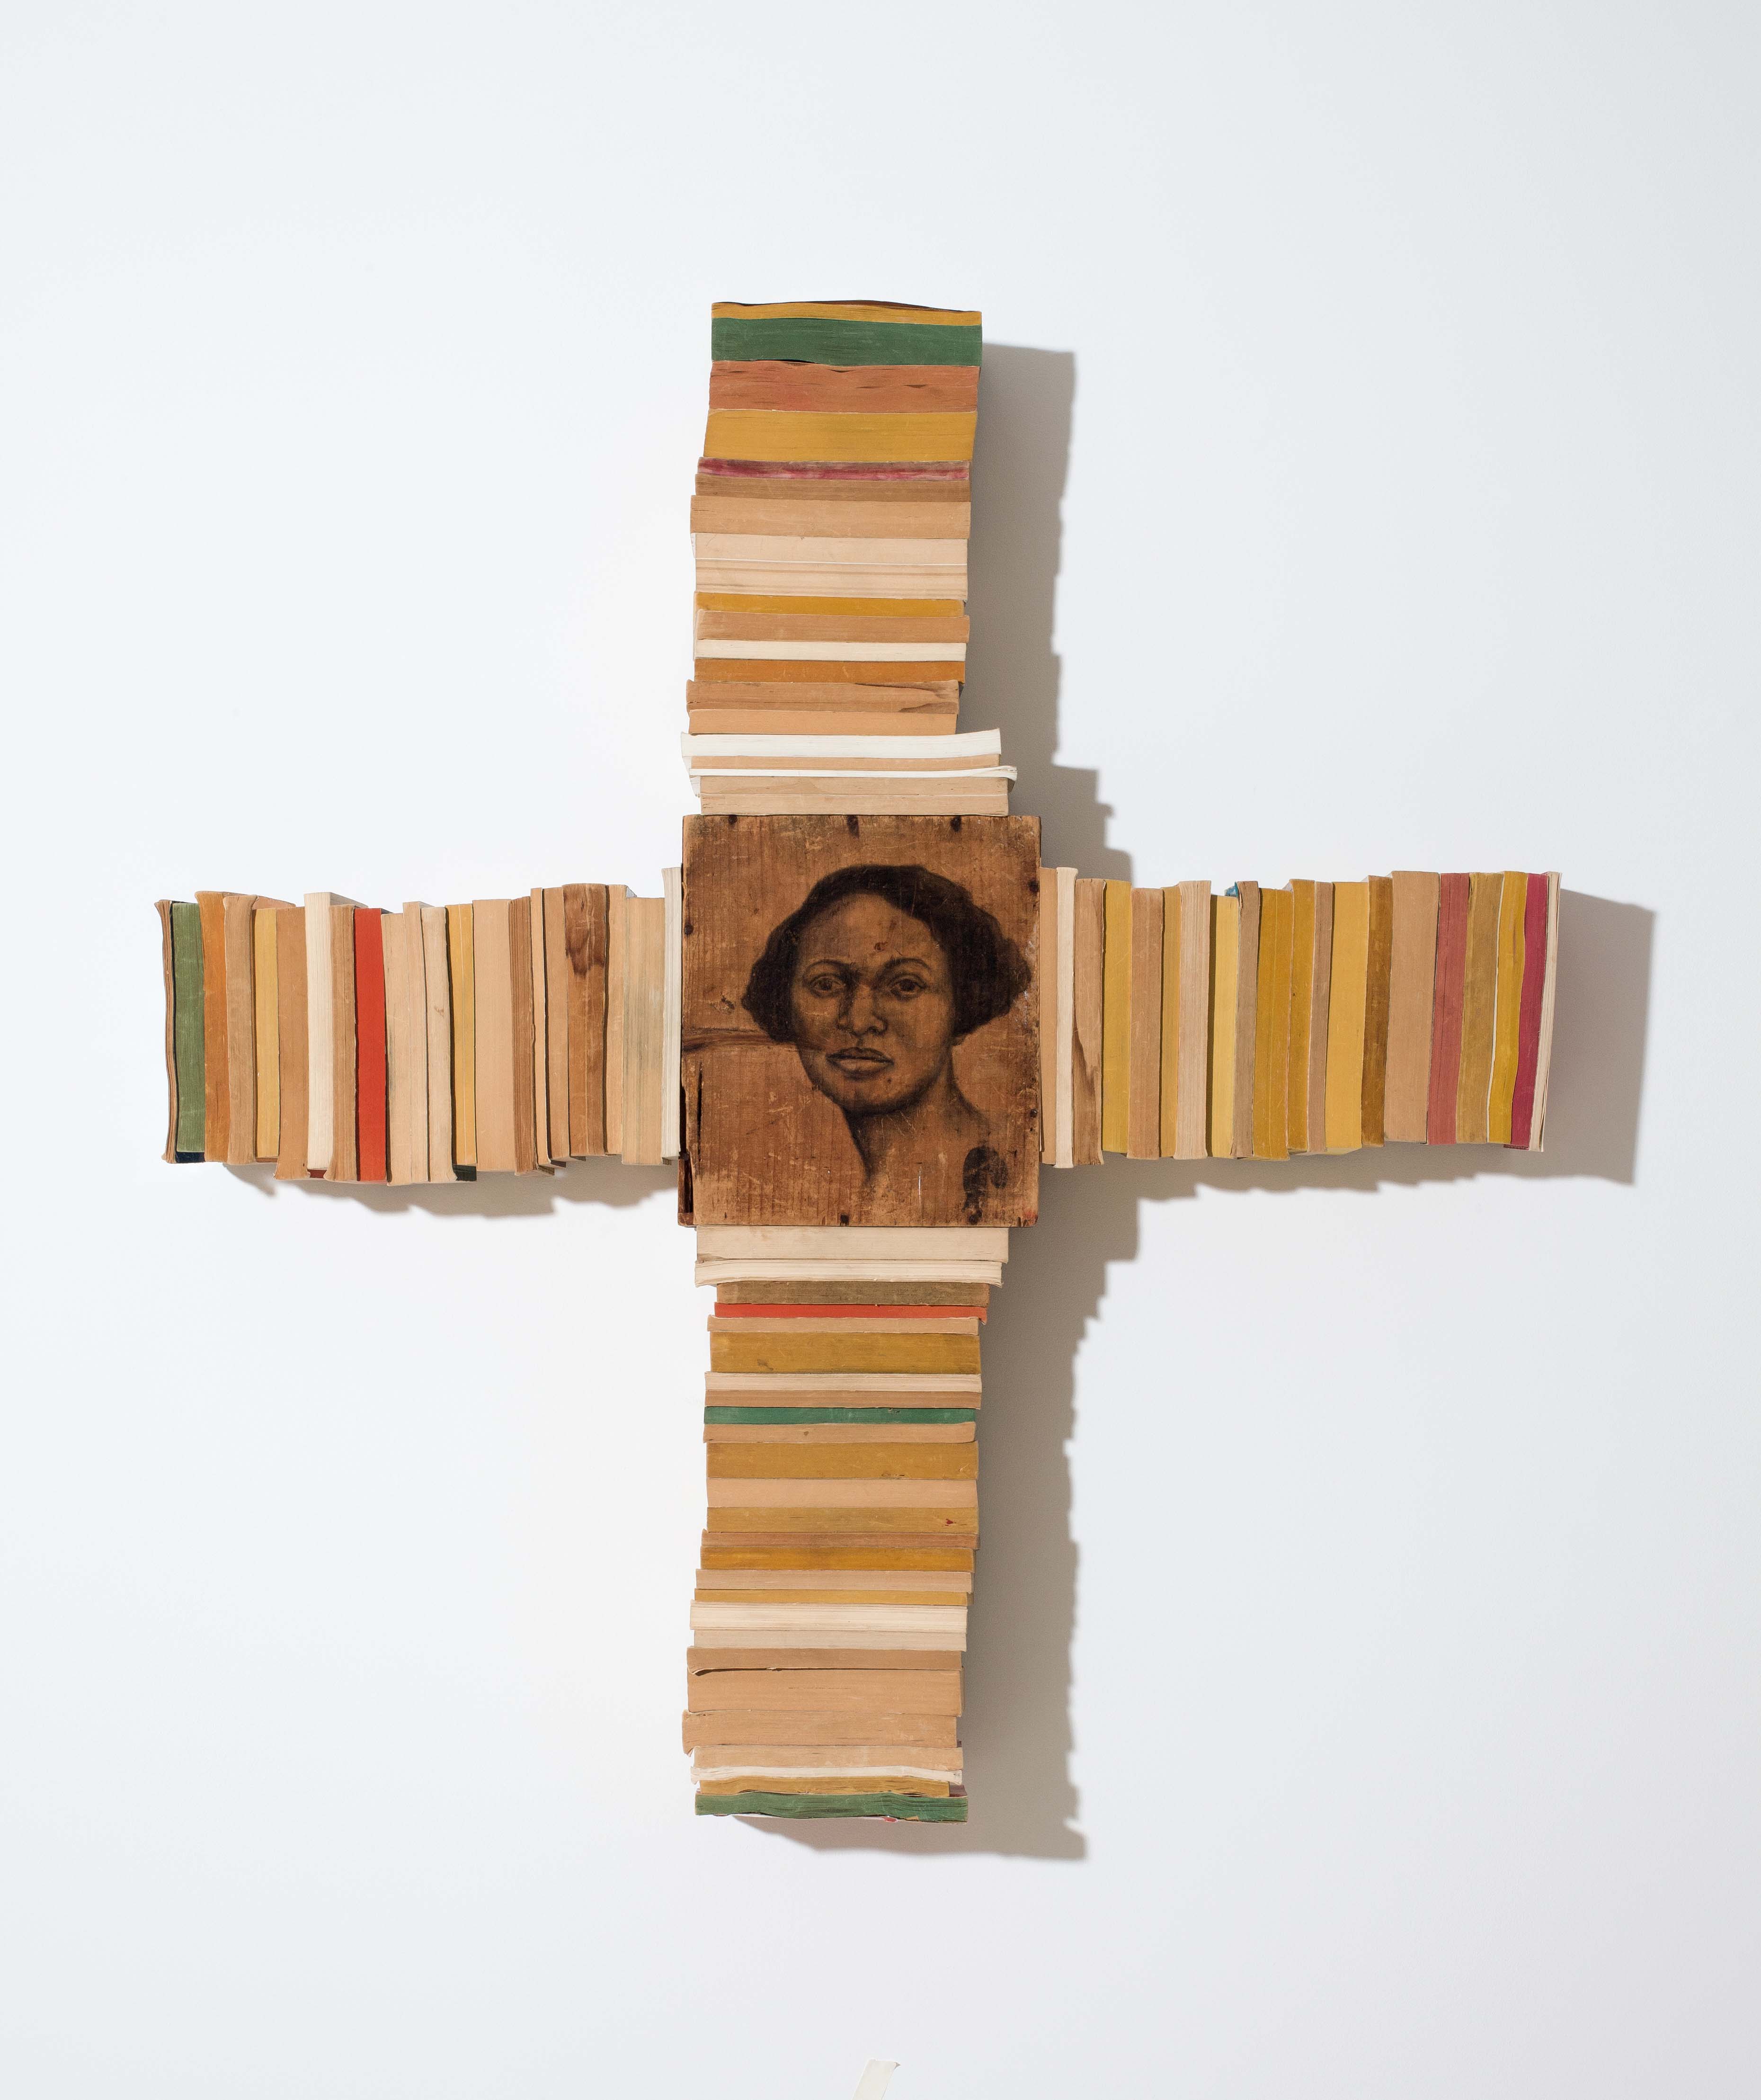 An assortment of books photographed in domino formation (tips up) arranged in a cross formation, a wood panel placed in the center with a woman's face painted with black ink.